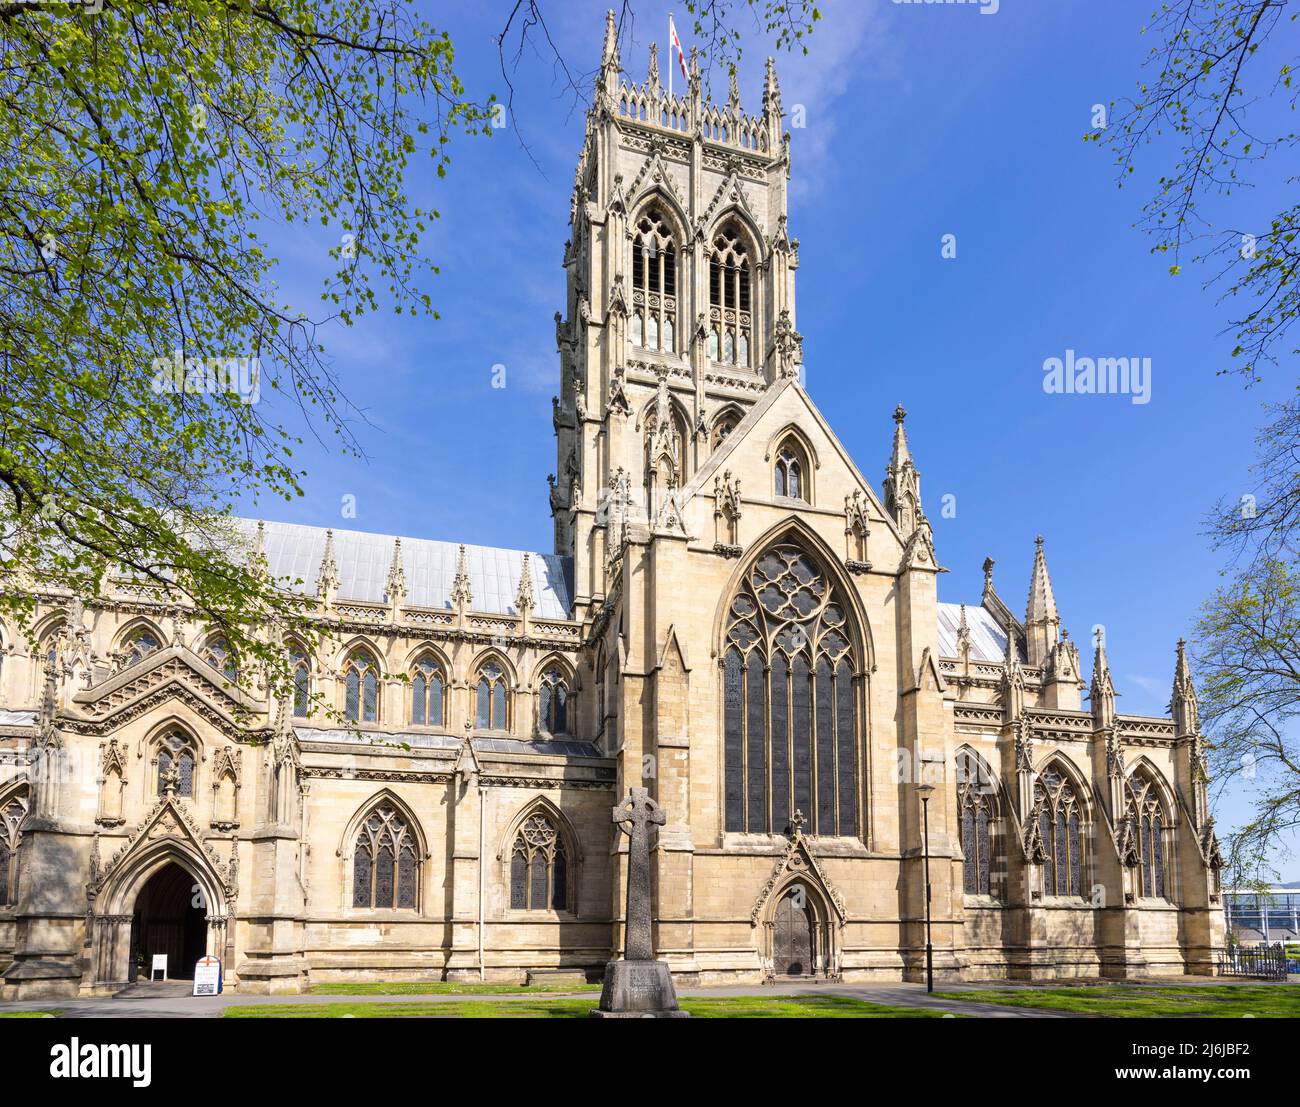 The Minster Church of St. George oder Doncaster Minster Doncaster South Yorkshire England gb Europa Stockfoto